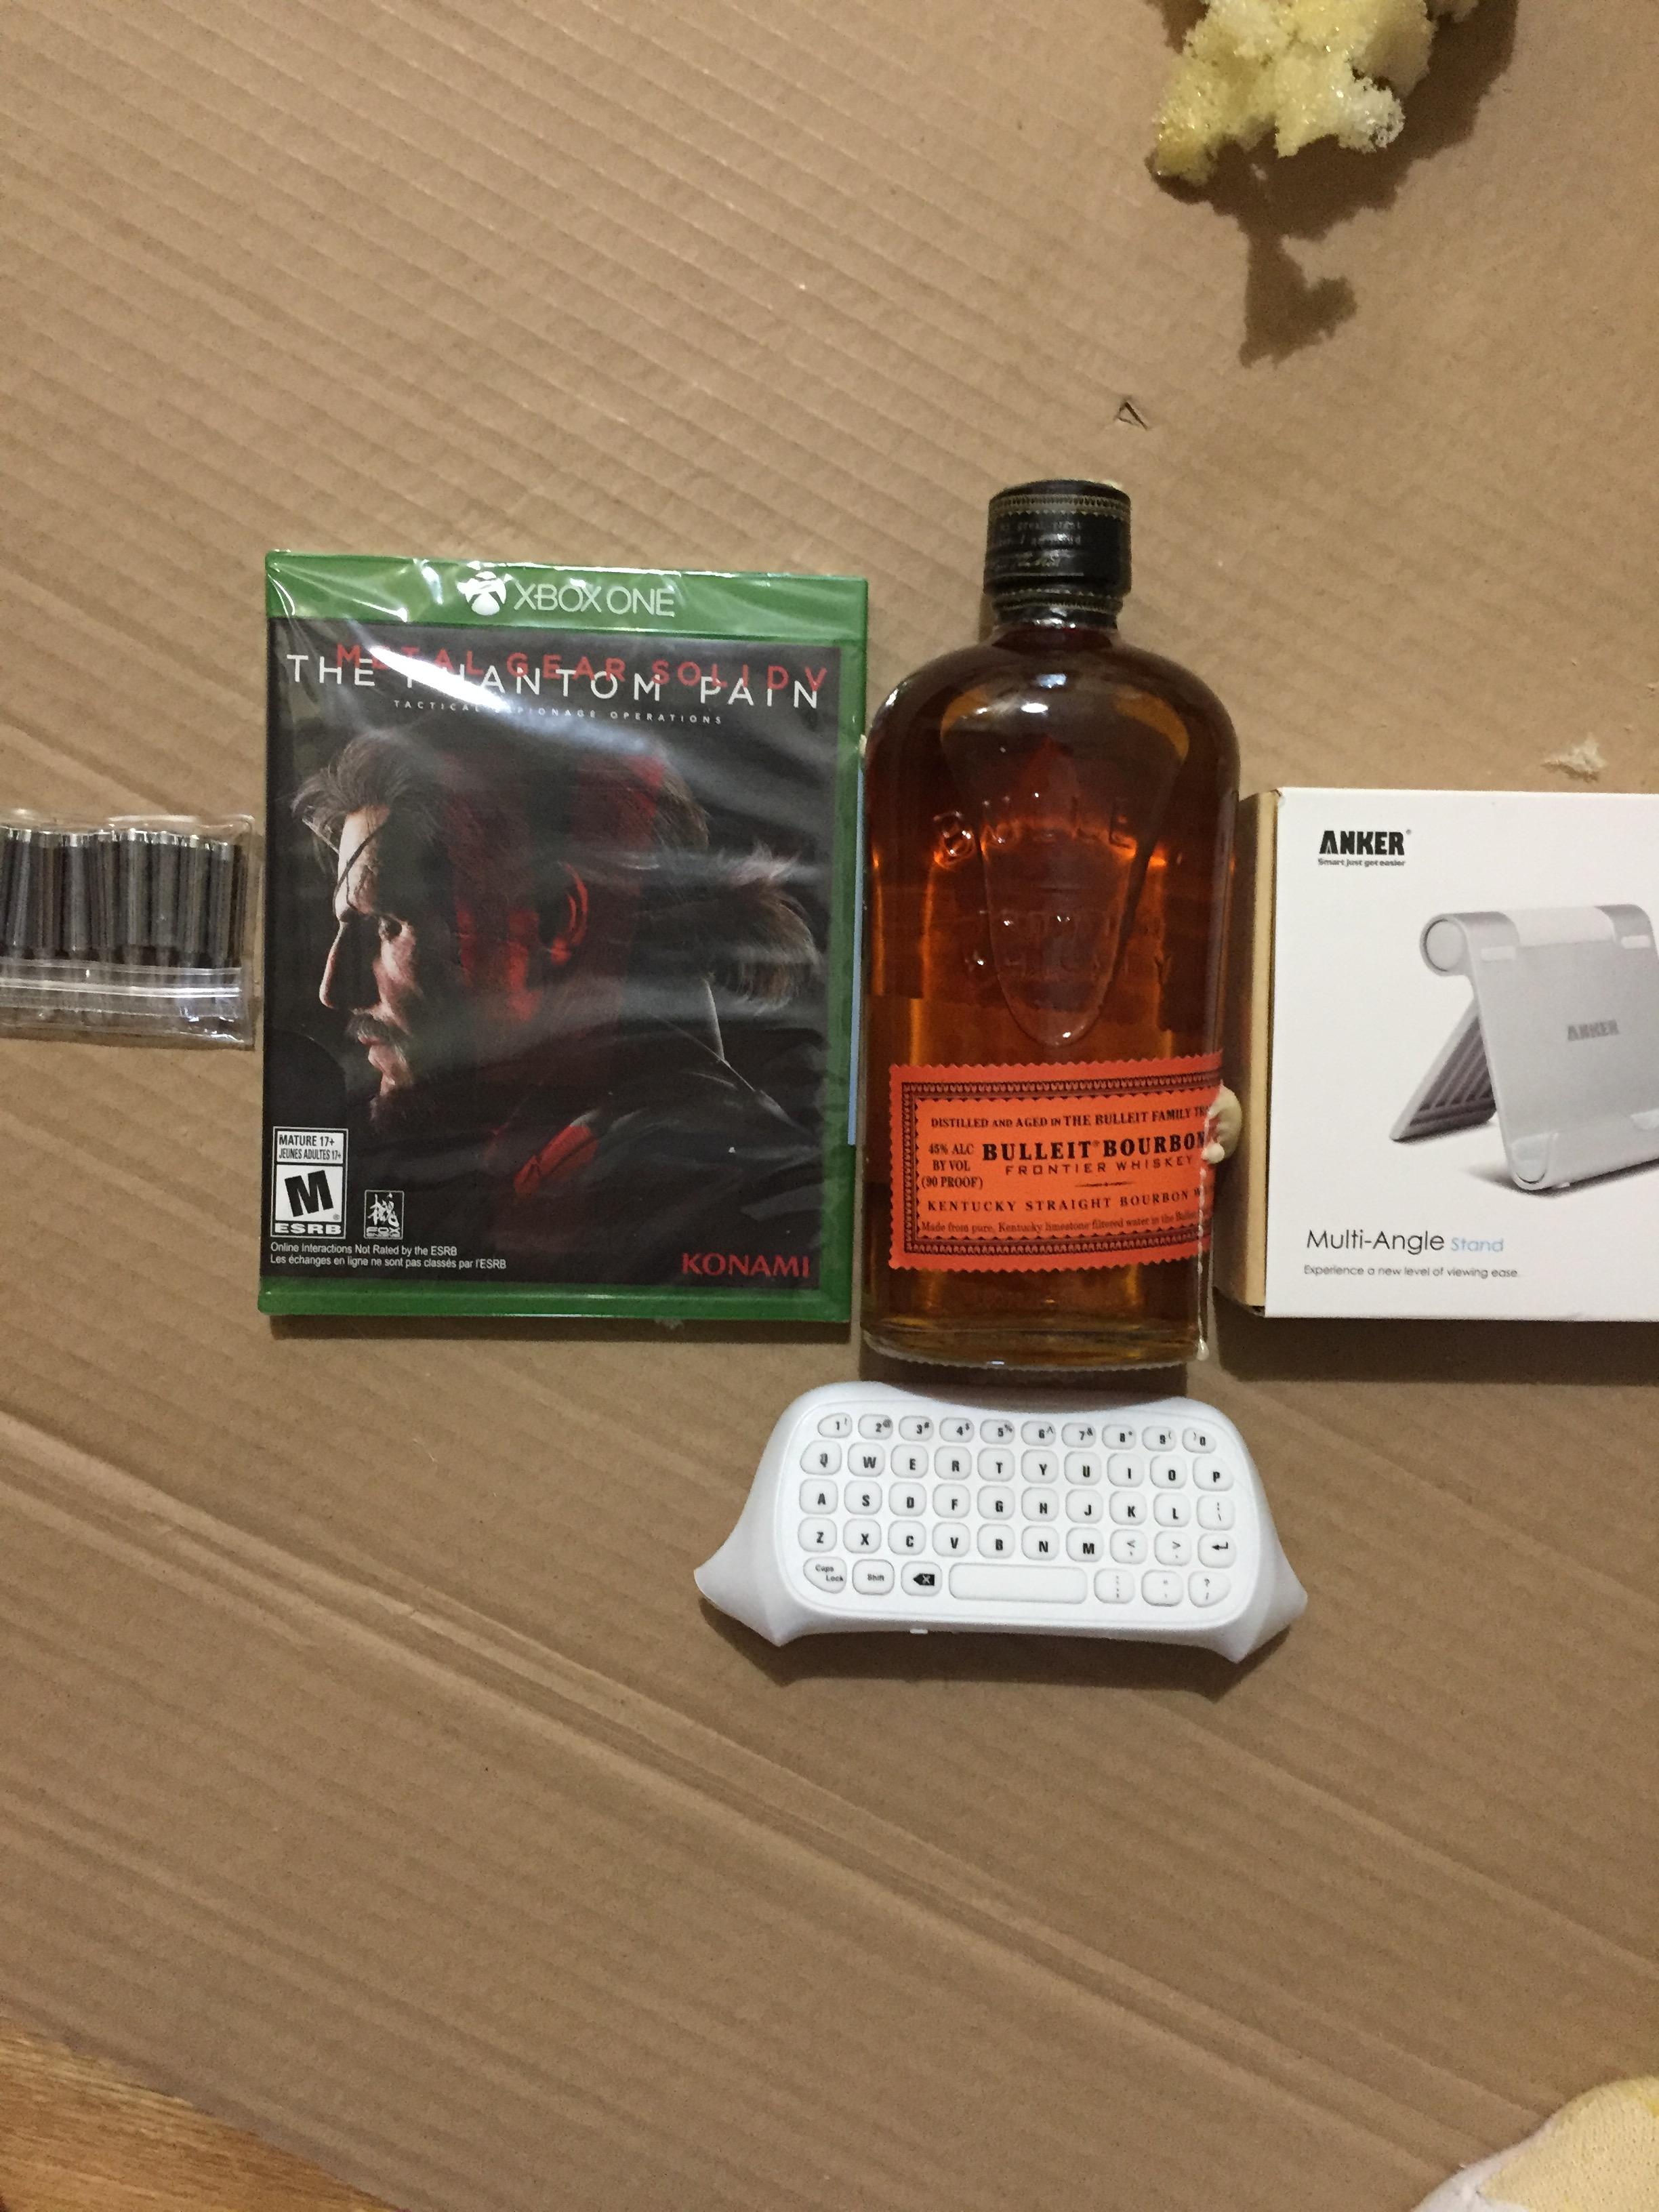 The full haul. The xbox one keyboard I had received in an earlier shipment direct from amazon.